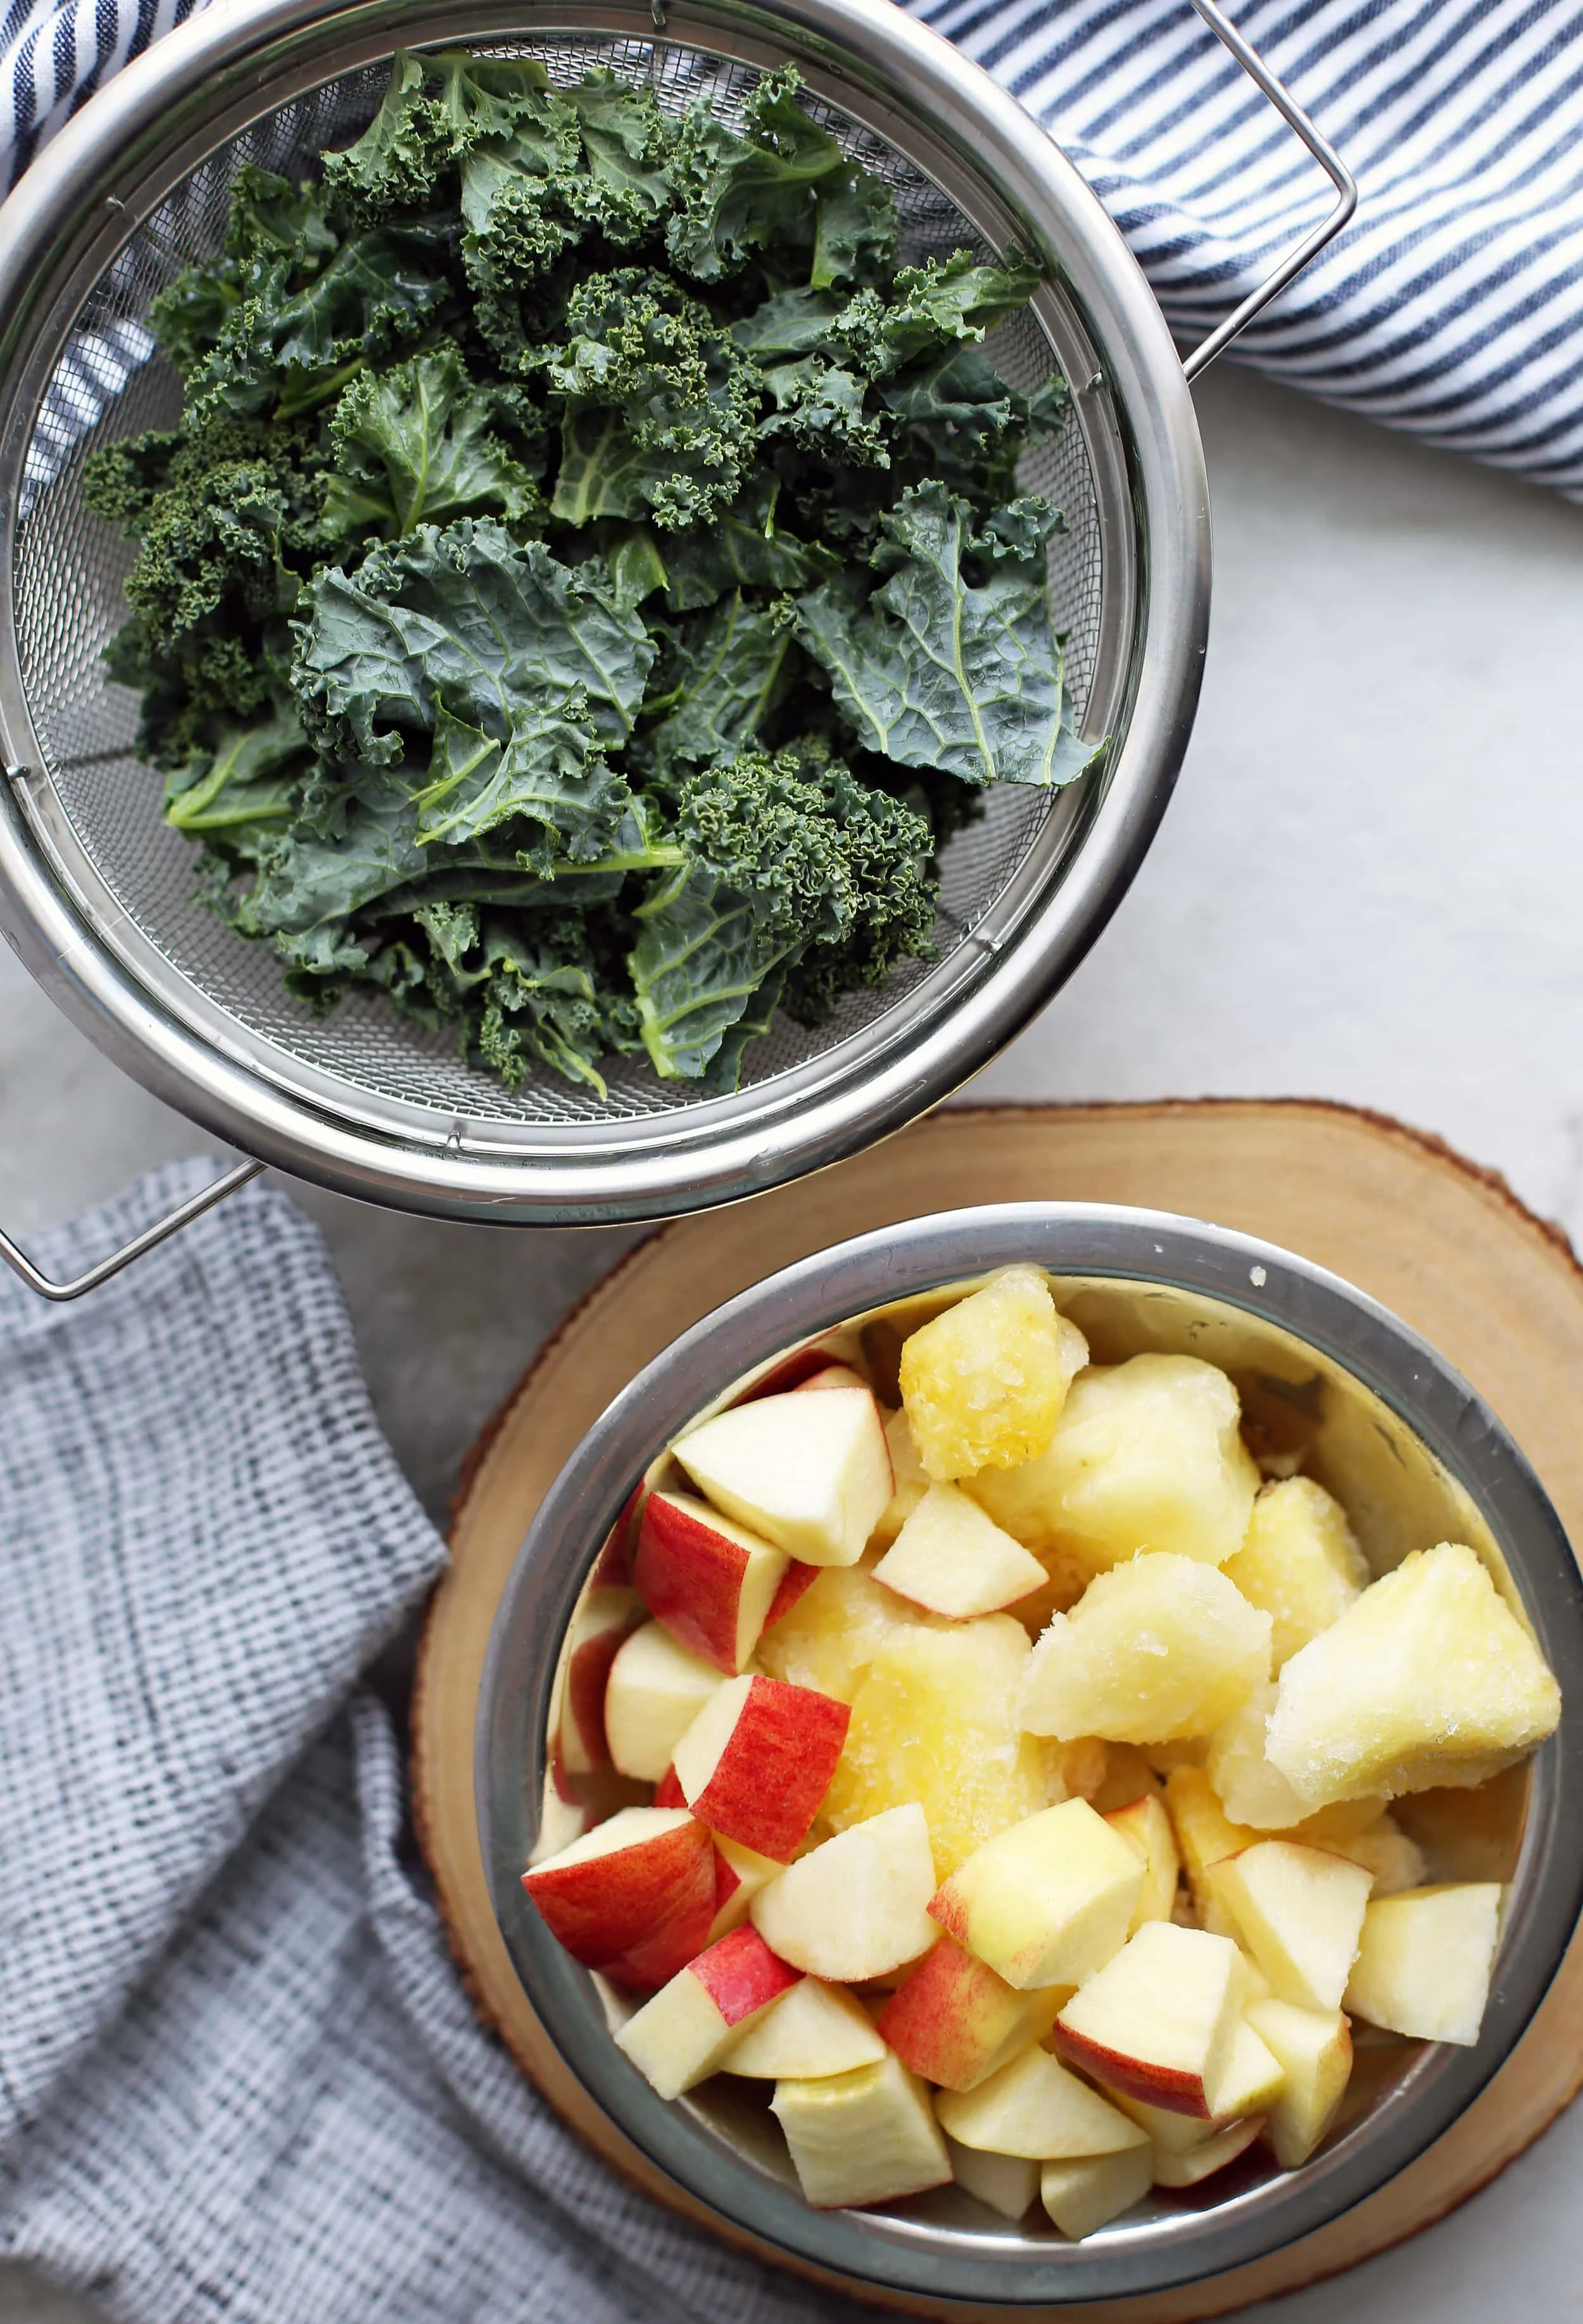 A bowl containing frozen pineapple chunks and chopped apples and a stainer containing chopped kale.